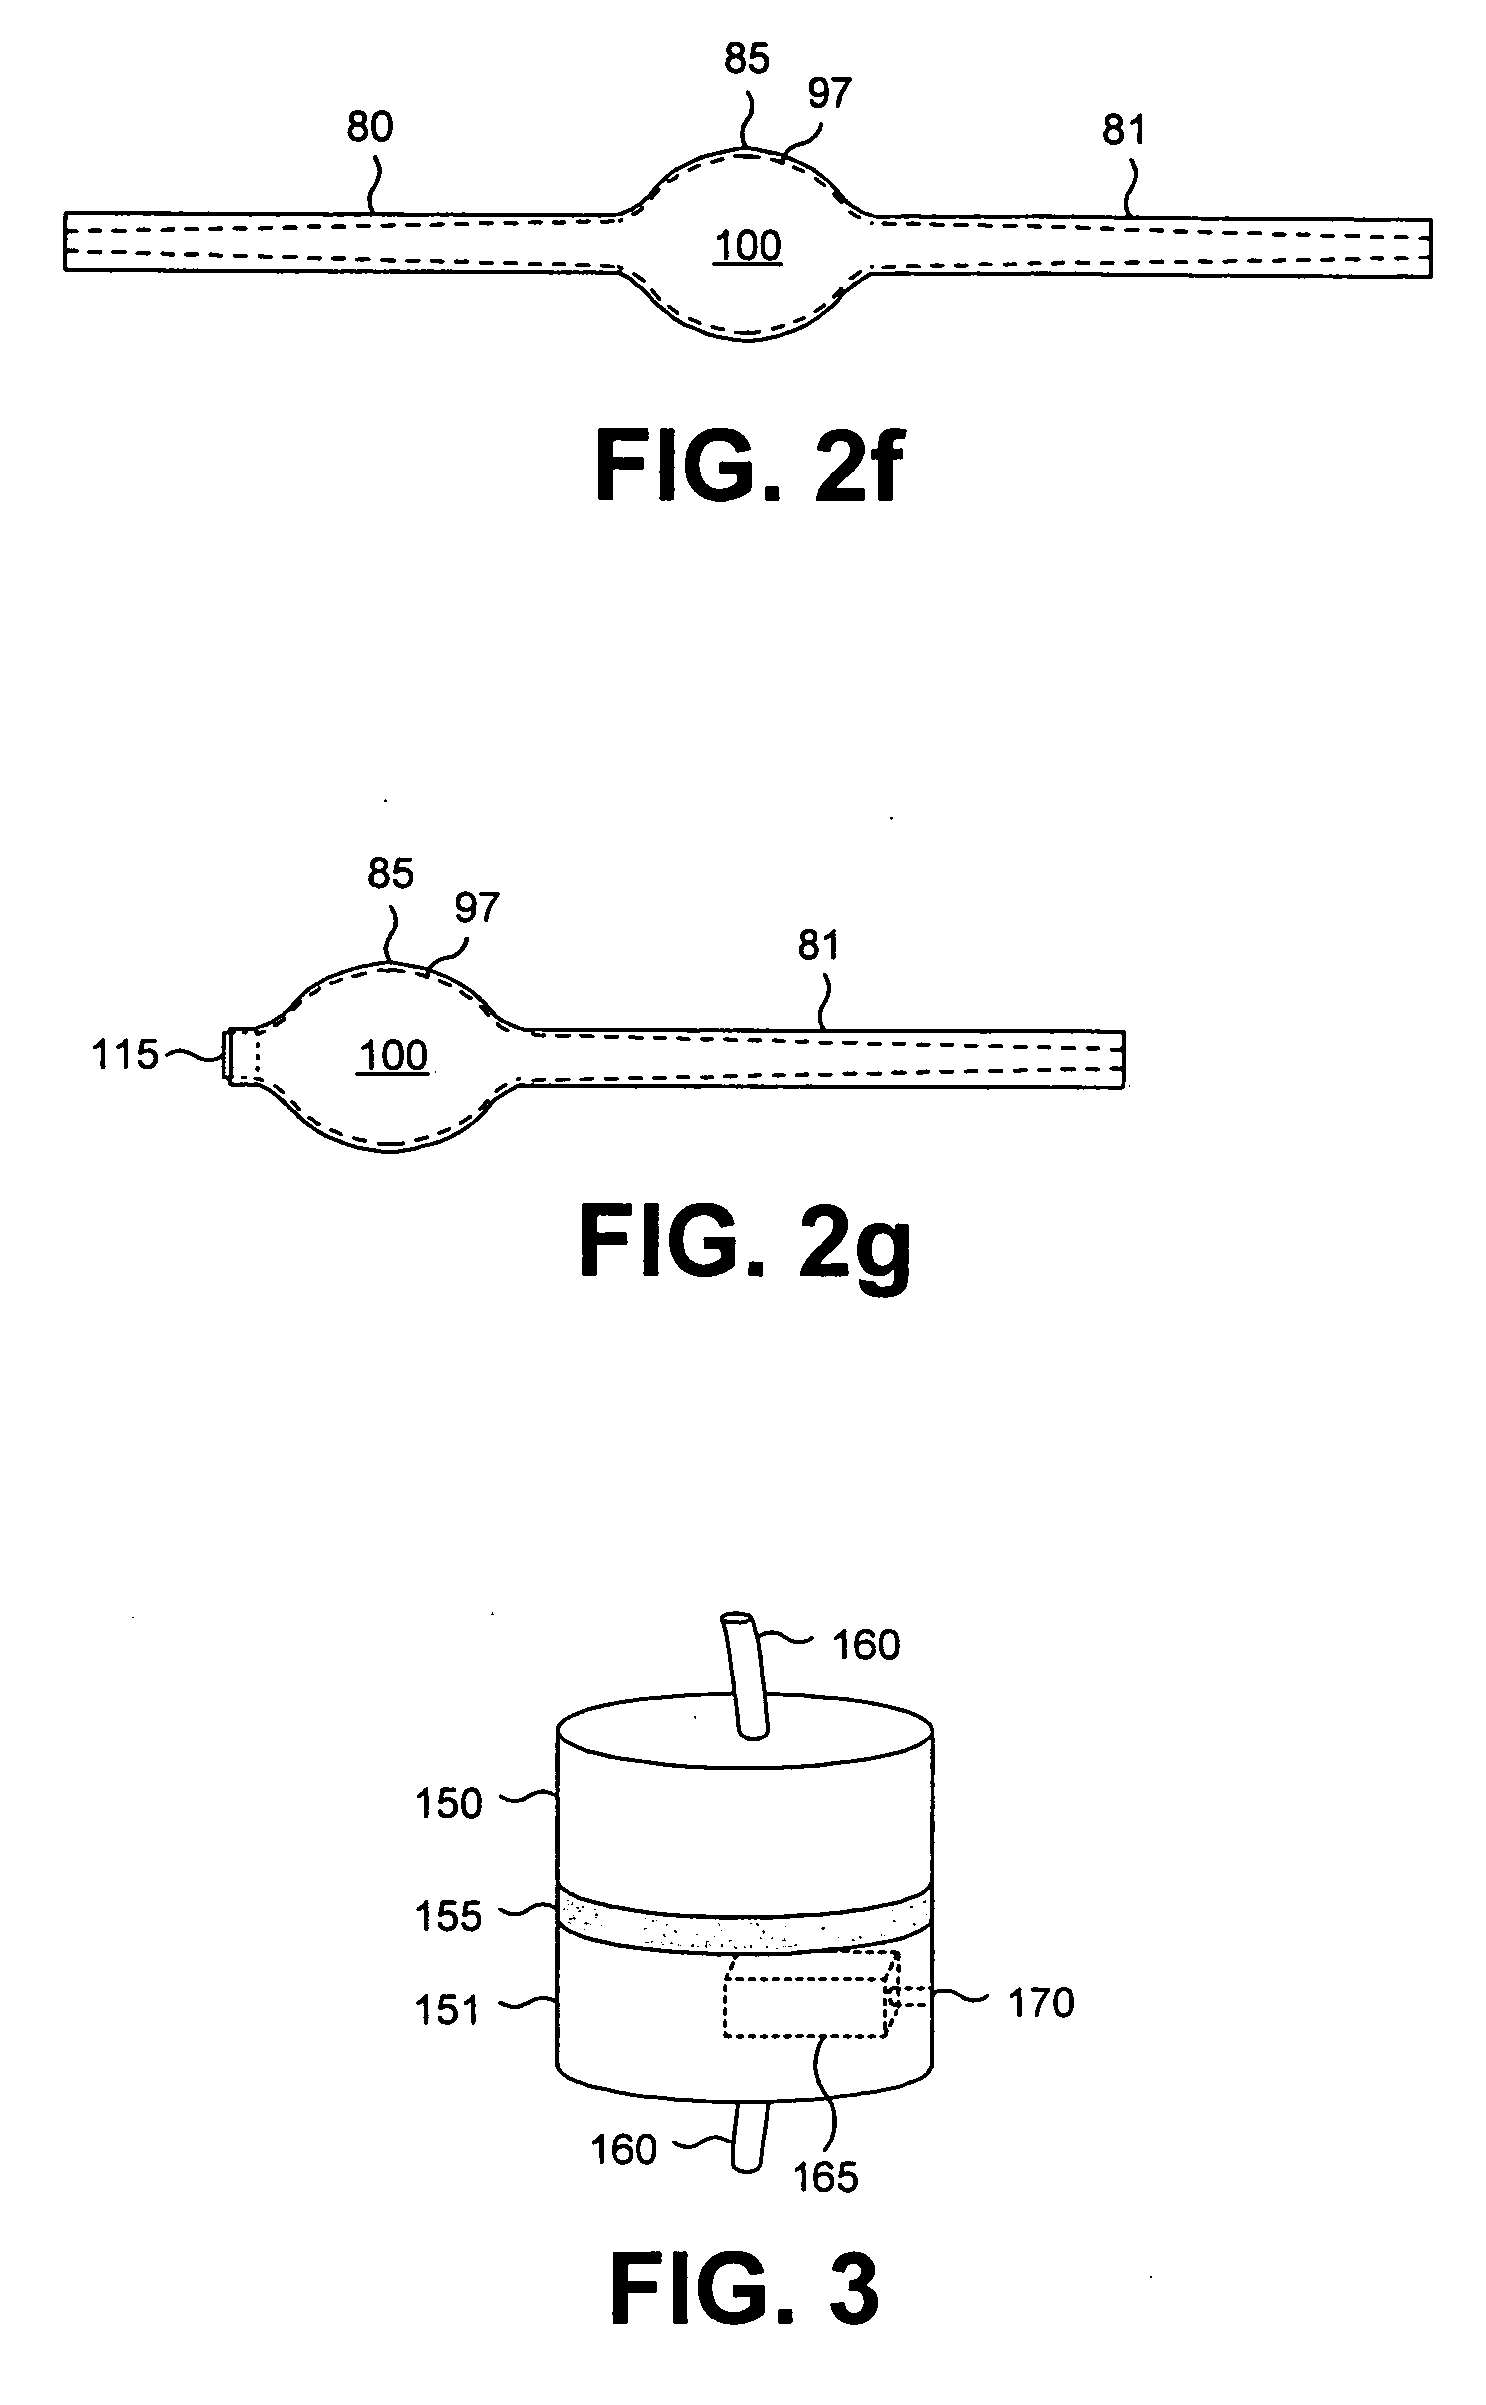 Resorbable hollow devices for implantation and delivery of therapeutic agents